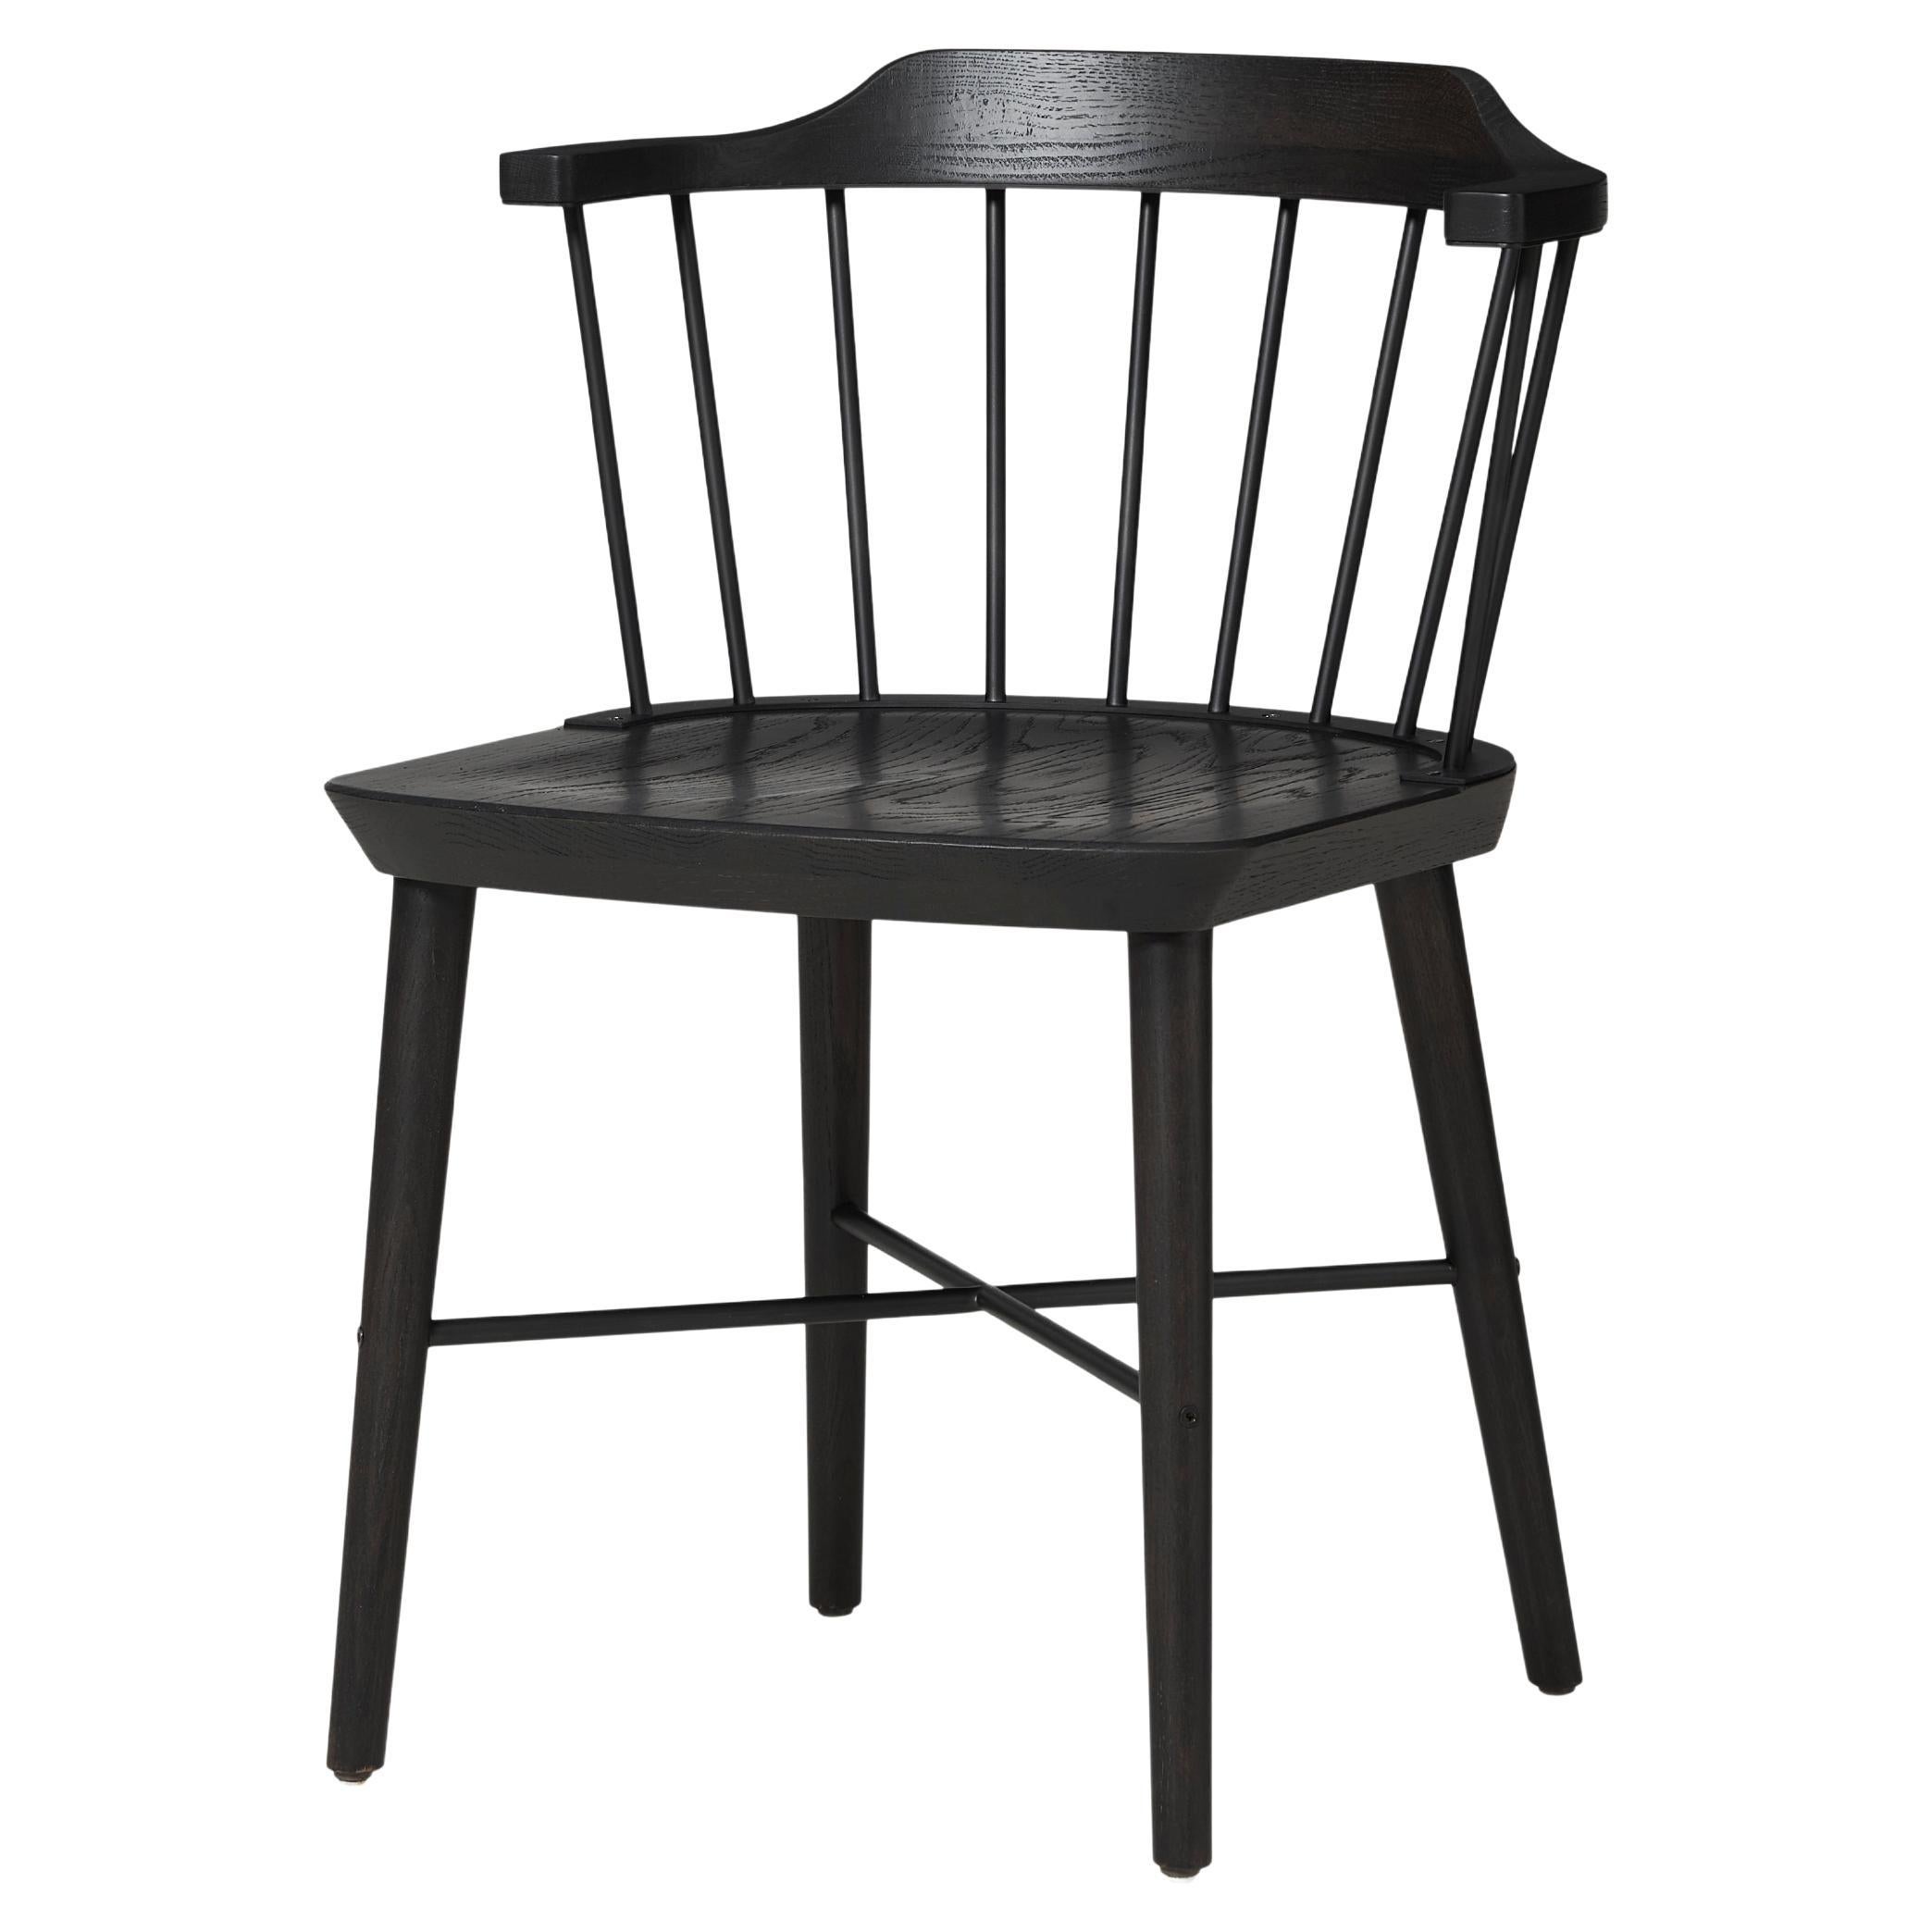 Stellar Works Dining Room Chairs